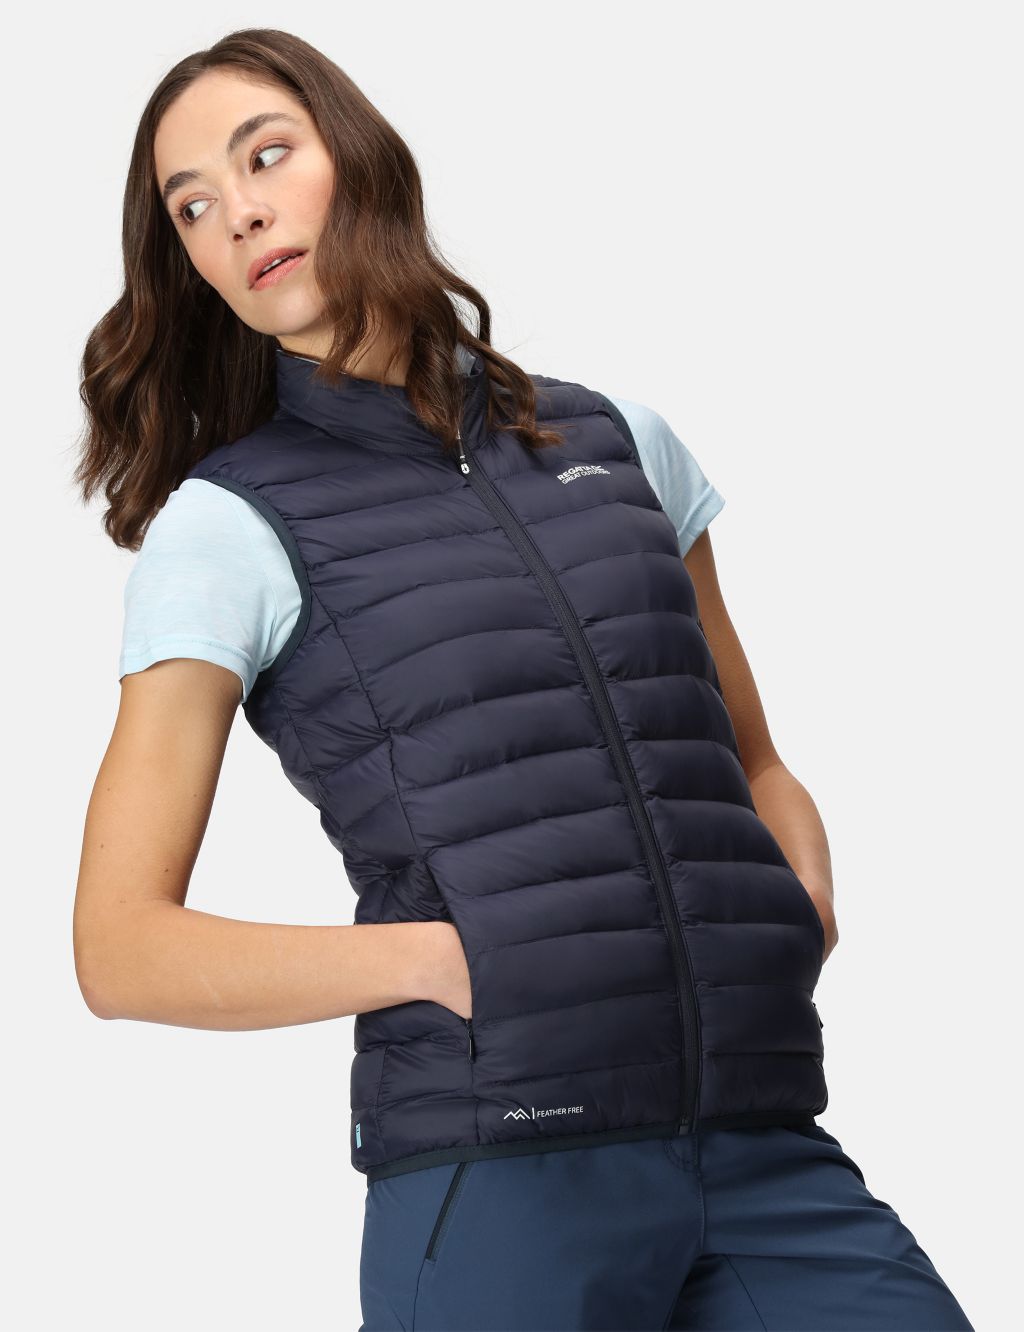 Marizion Water-Repellent Gilet image 7